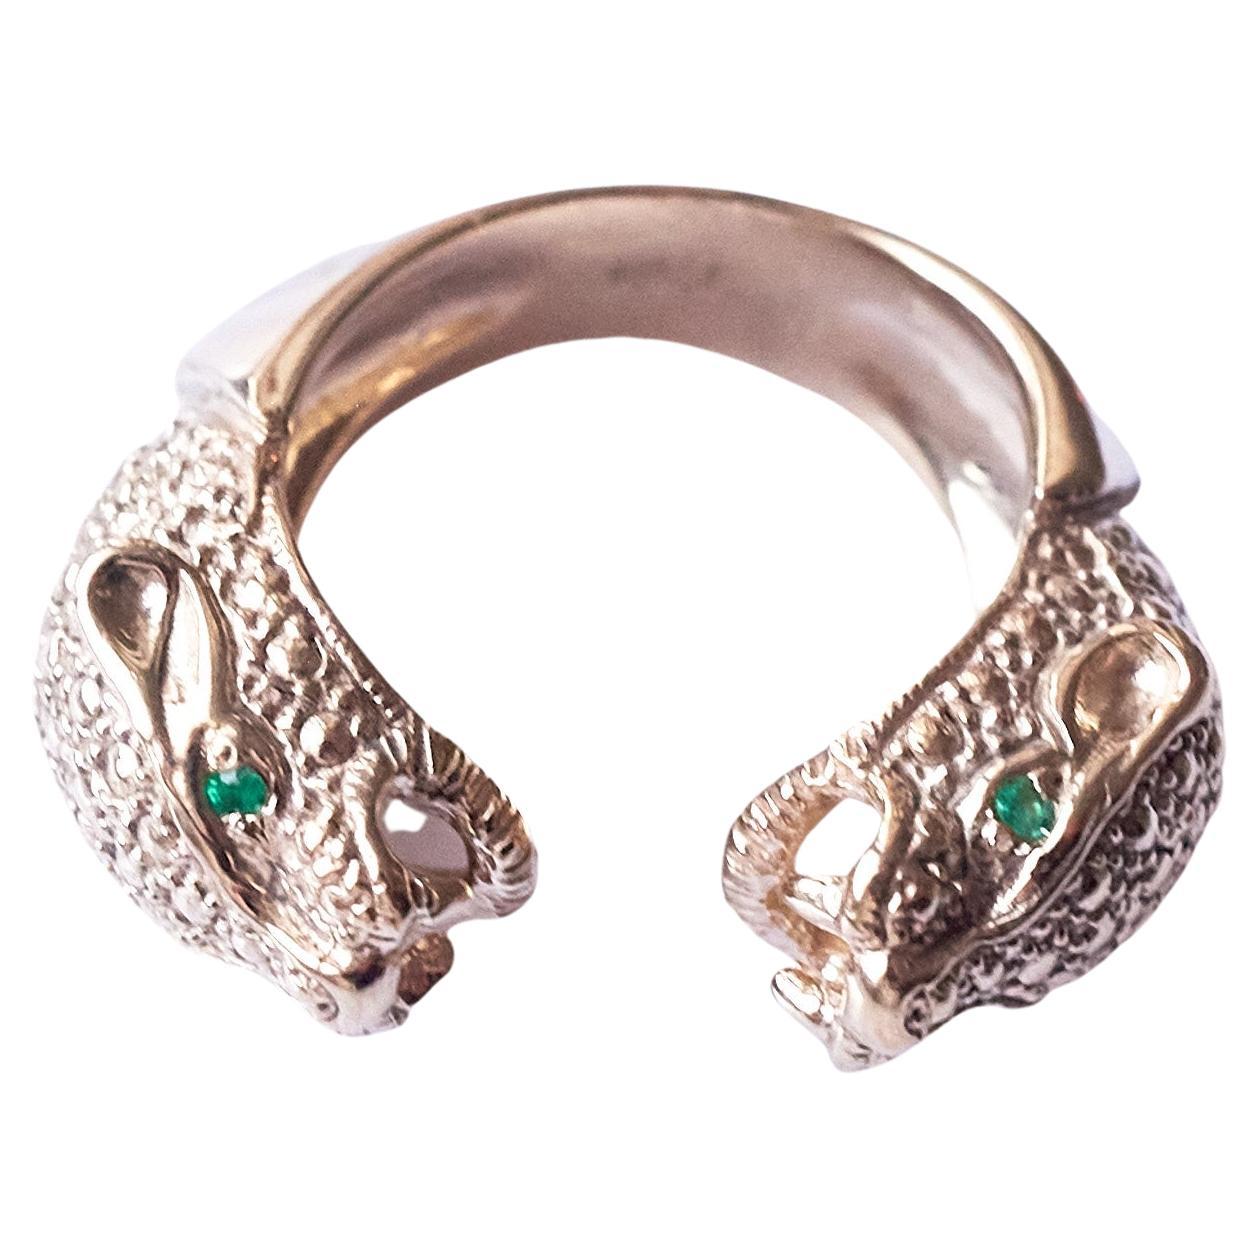 Emerald Jaguar Ring Animal Jewelry Cocktail Ring Bronze J Dauphin For Sale